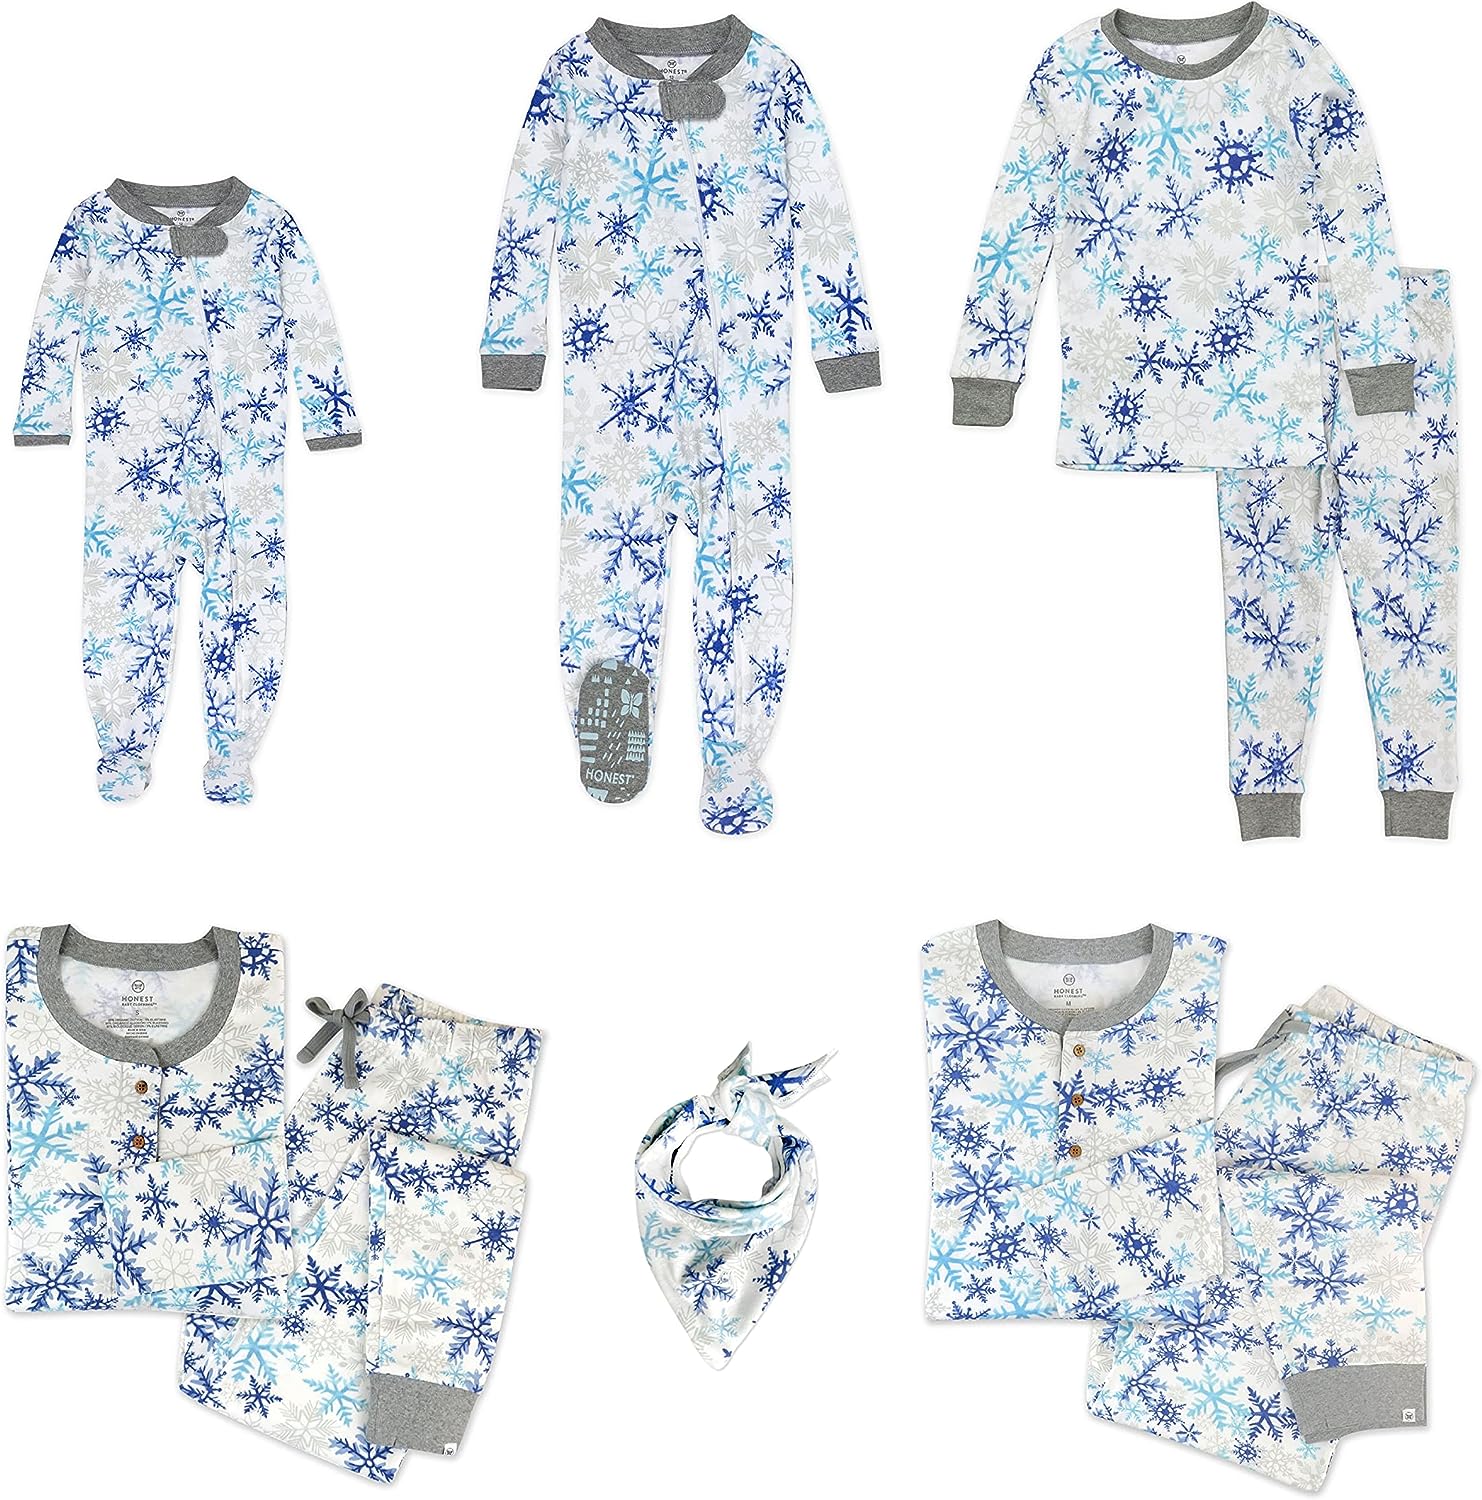 The Children's Place Baby Family Matching, Fall Harvest Pajama Sets, Cotton  